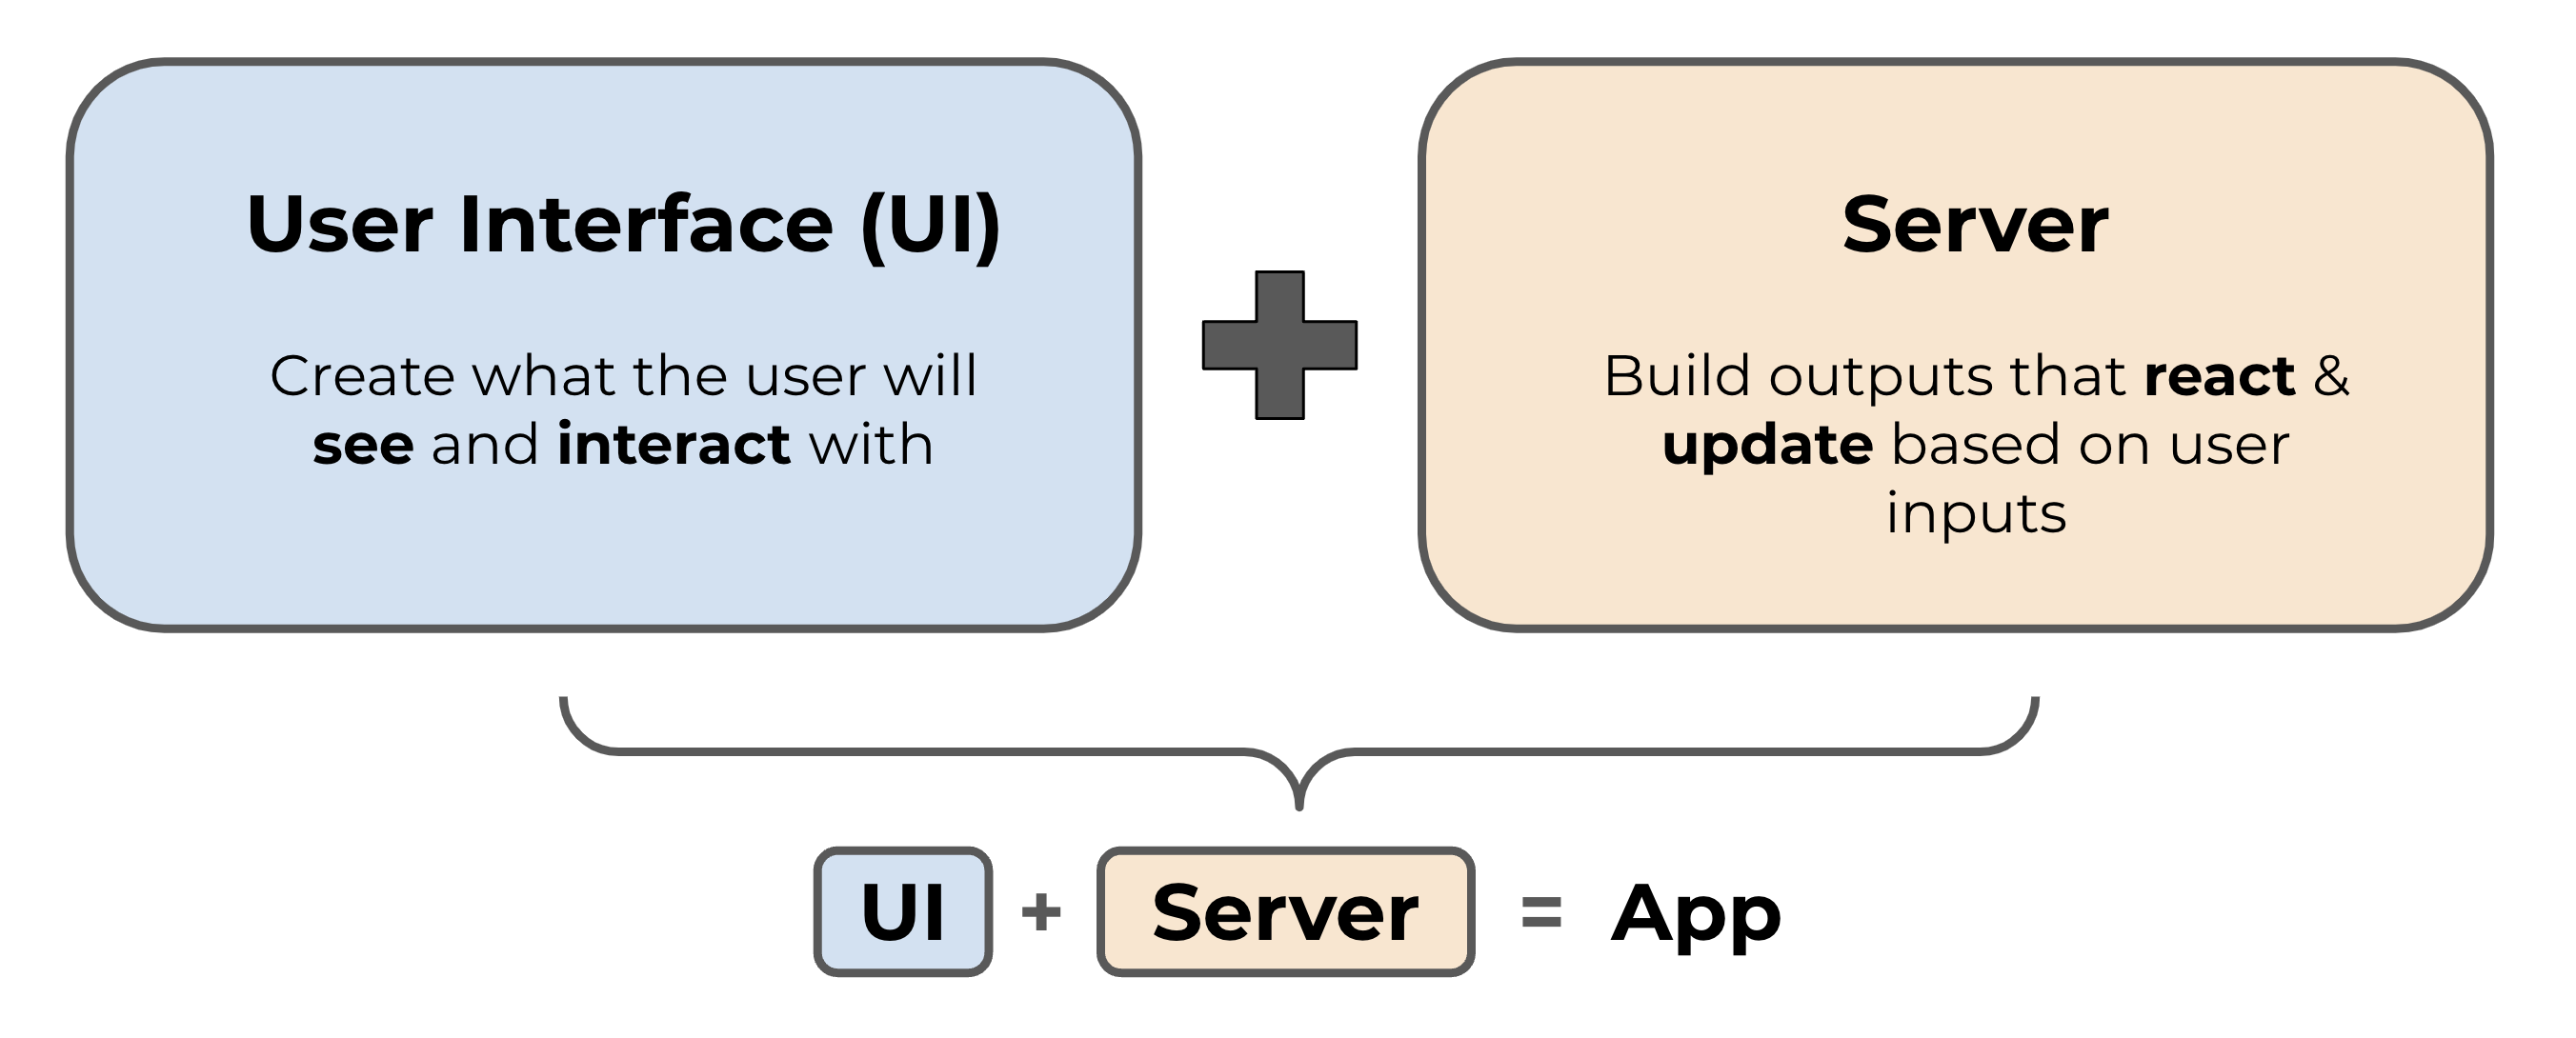 A simple schematic of a Shiny app, which includes the User Interface (UI, colored in blue) and the Server (colored in orange). The UI creates what the user will see and interact with, while the server builds the outputs that react and update based on user inputs.